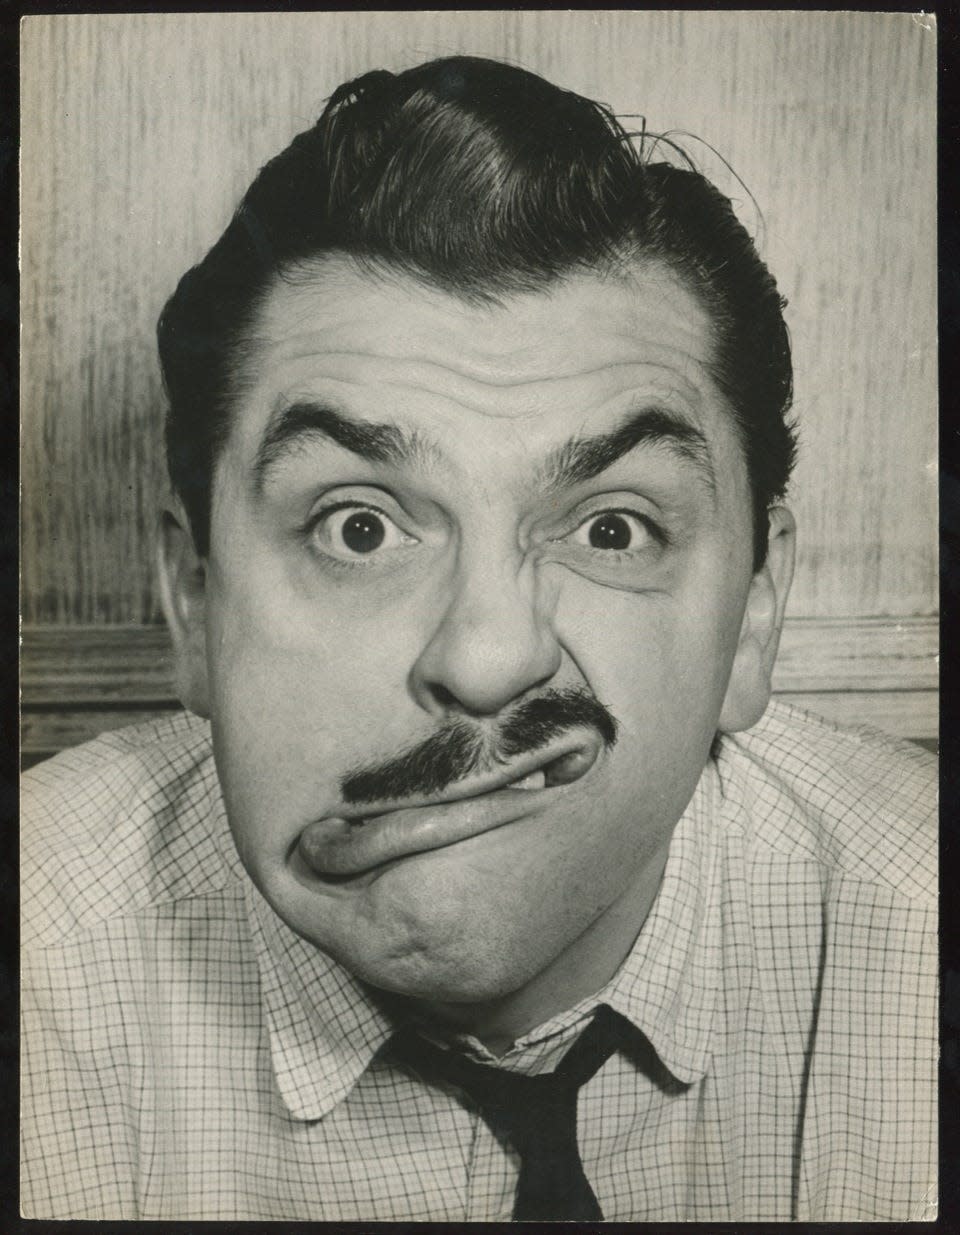 Ernie Kovacs in an image from "Ernie in Kovacsland: Writings, Drawings, and Photographs from Television's Original Genius."